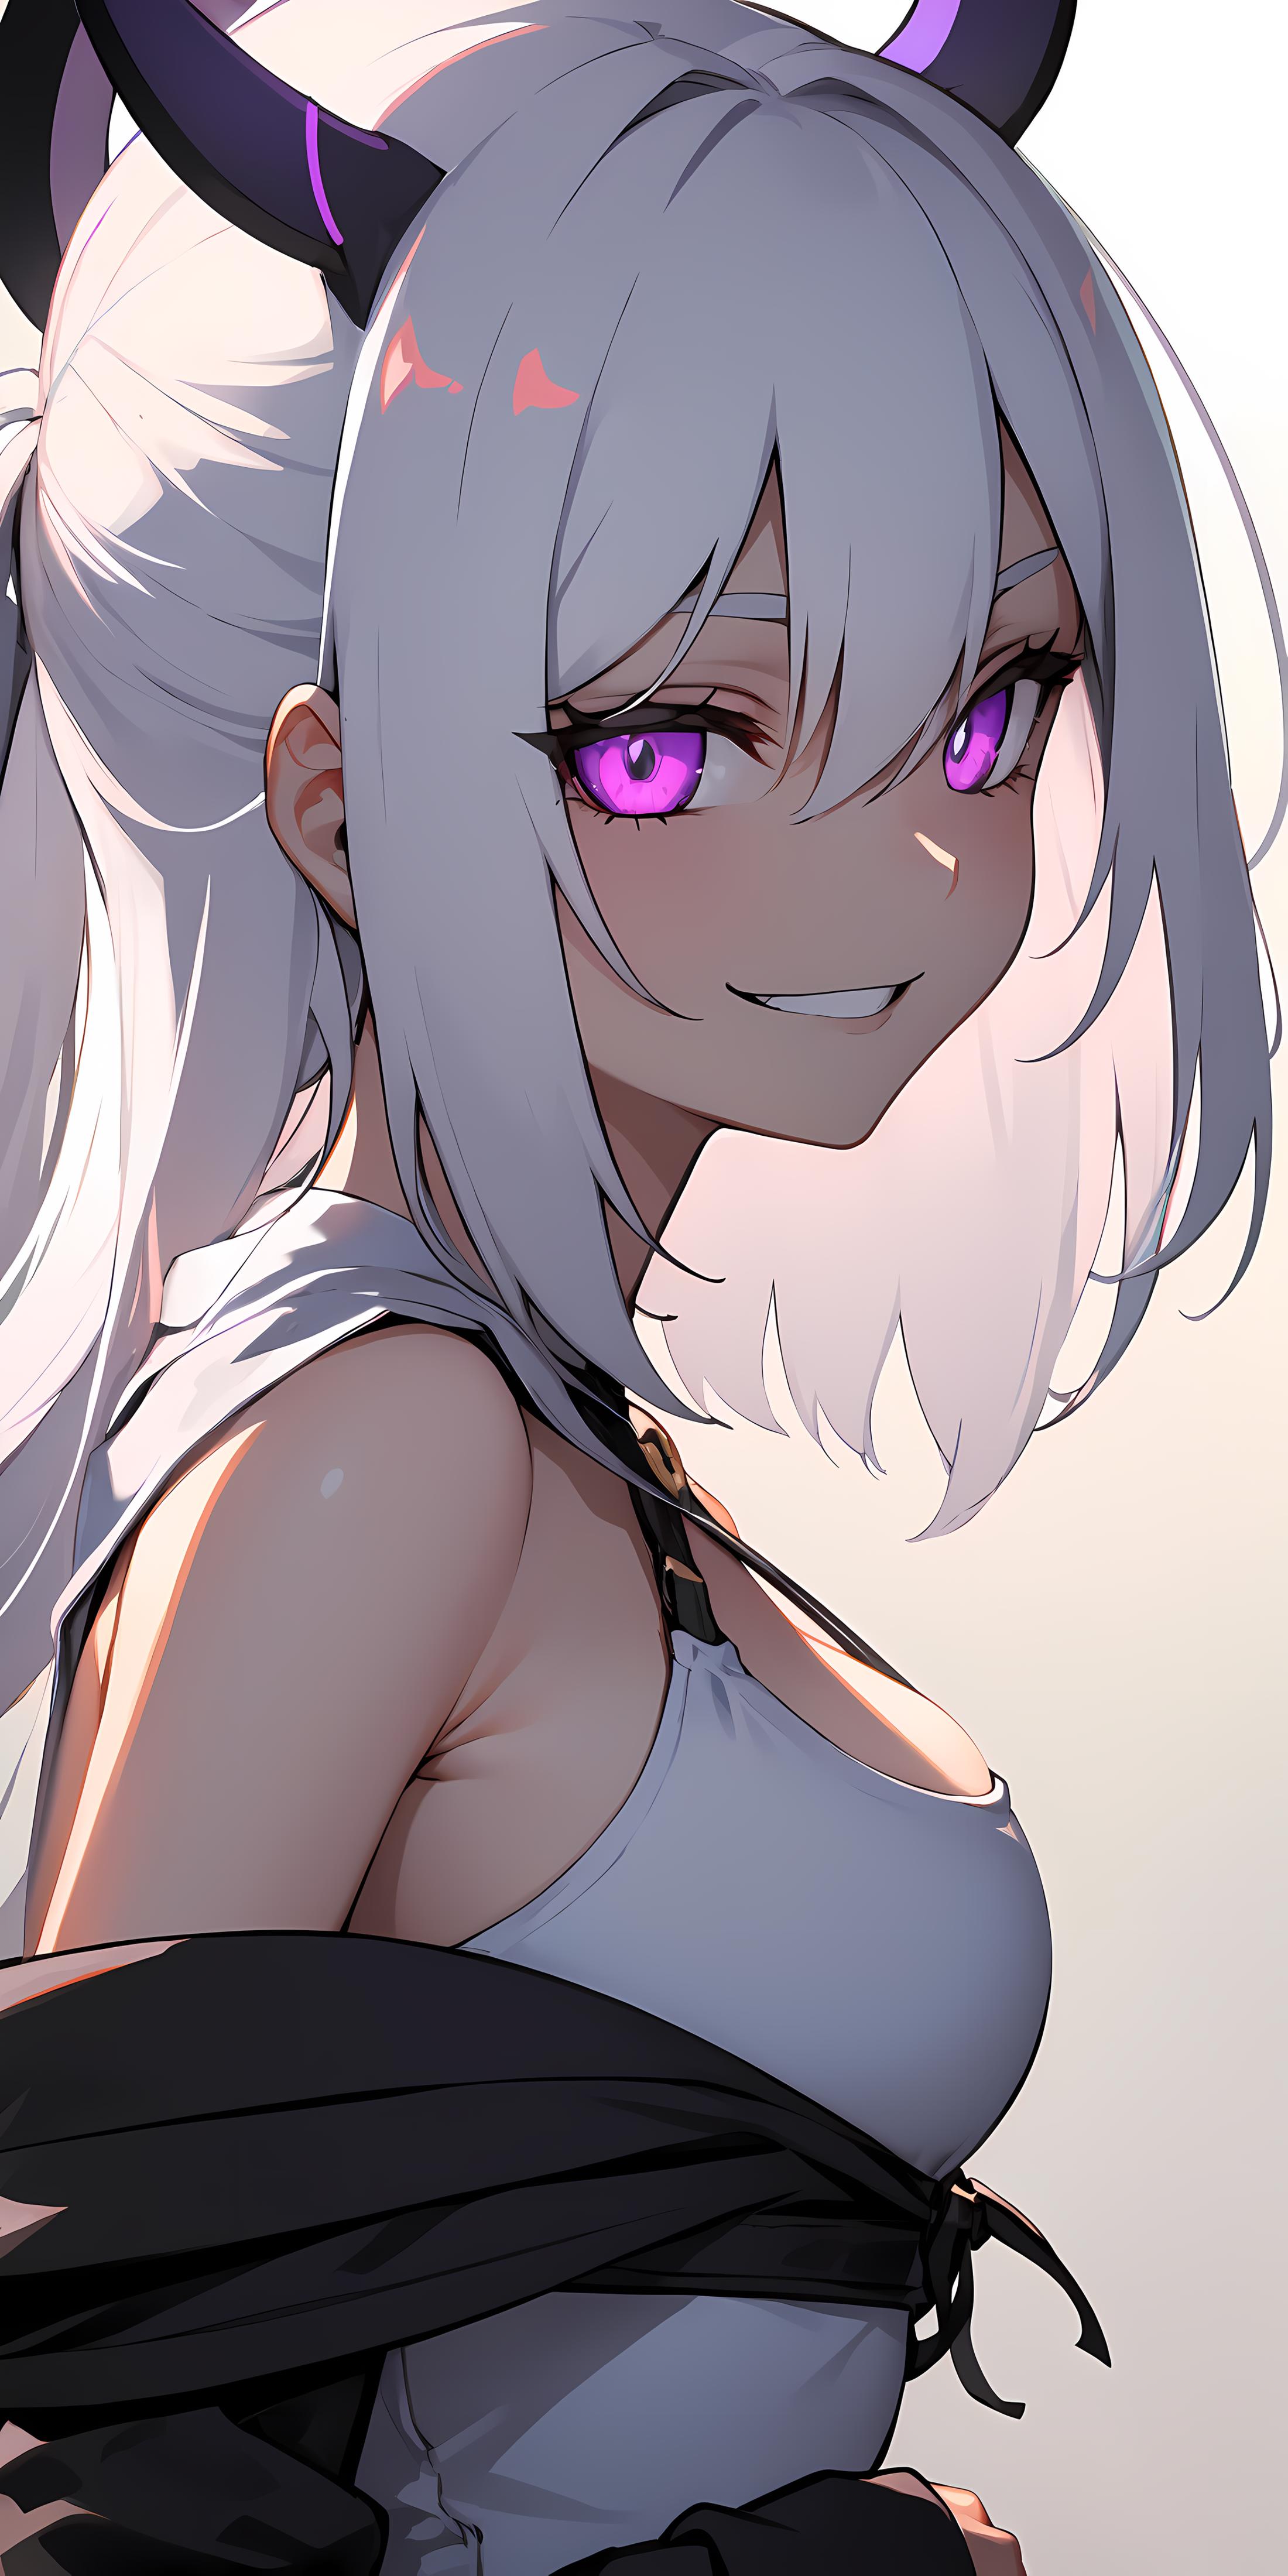 The beautiful girl with purple eyes and white hair.